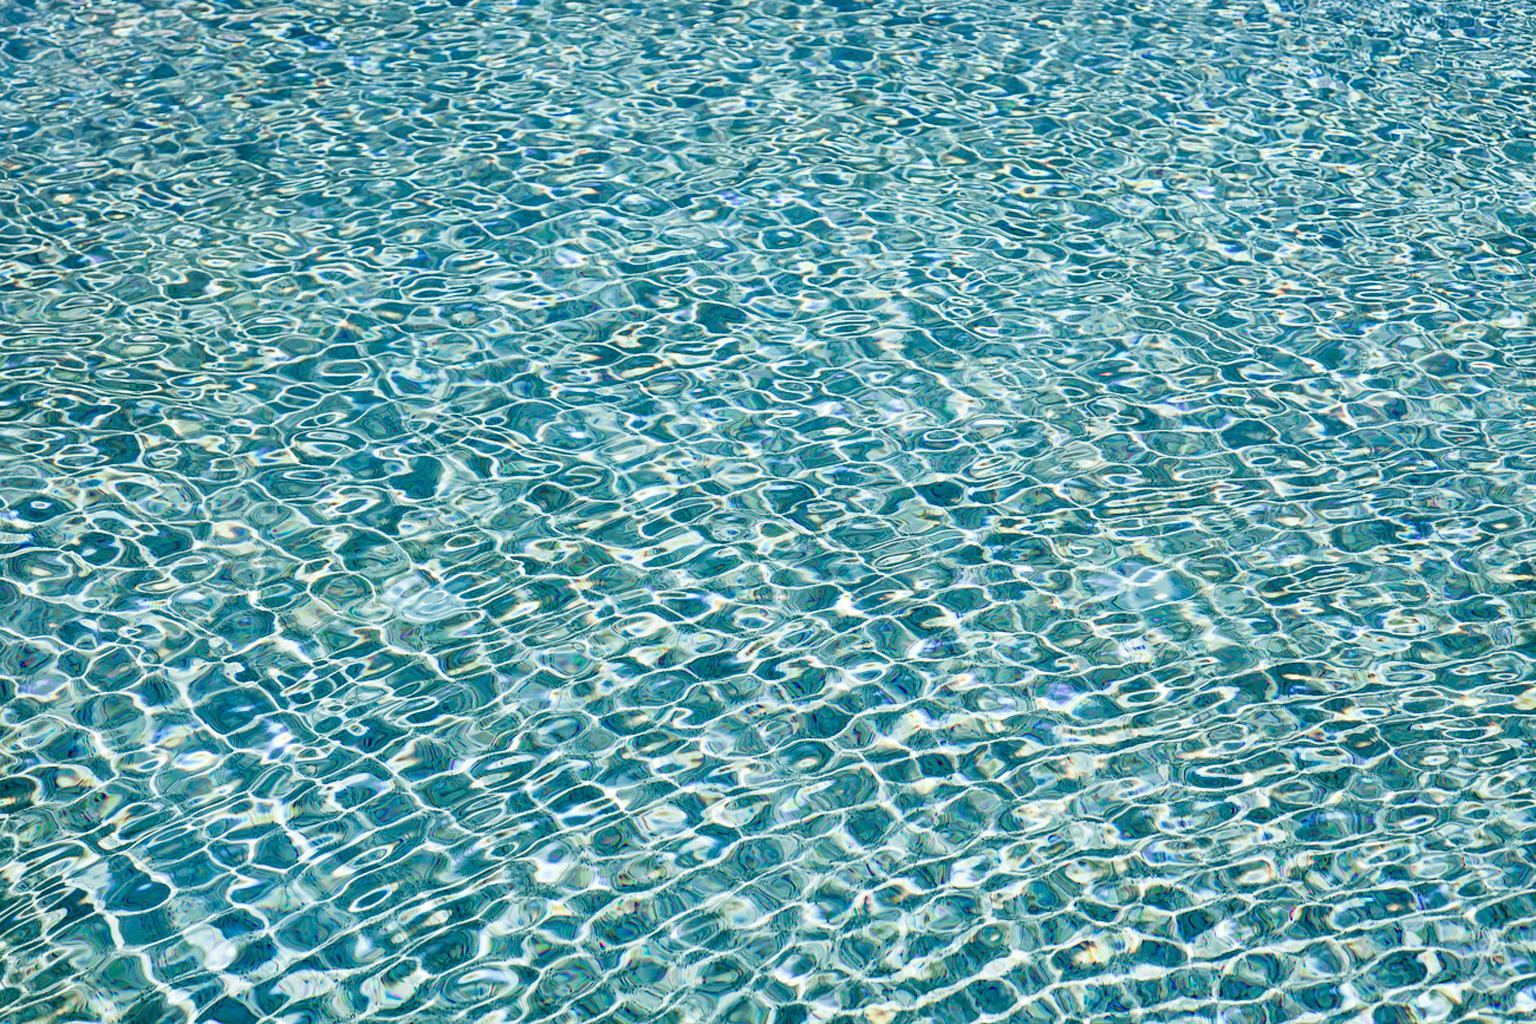 H2O ll - large format photograph of sun reflections on pool water surface